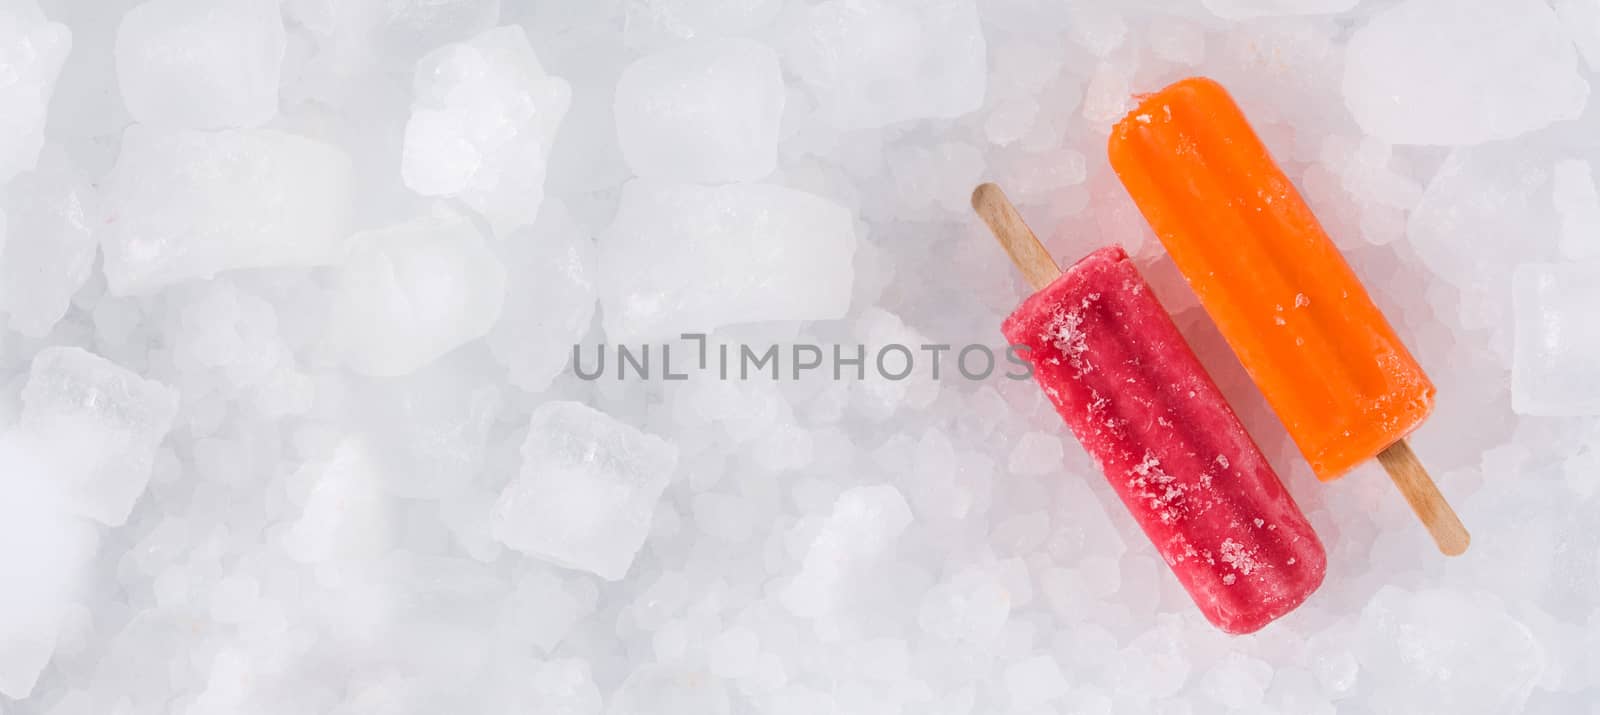 Orange and strawberry popsicles on ice background by chandlervid85